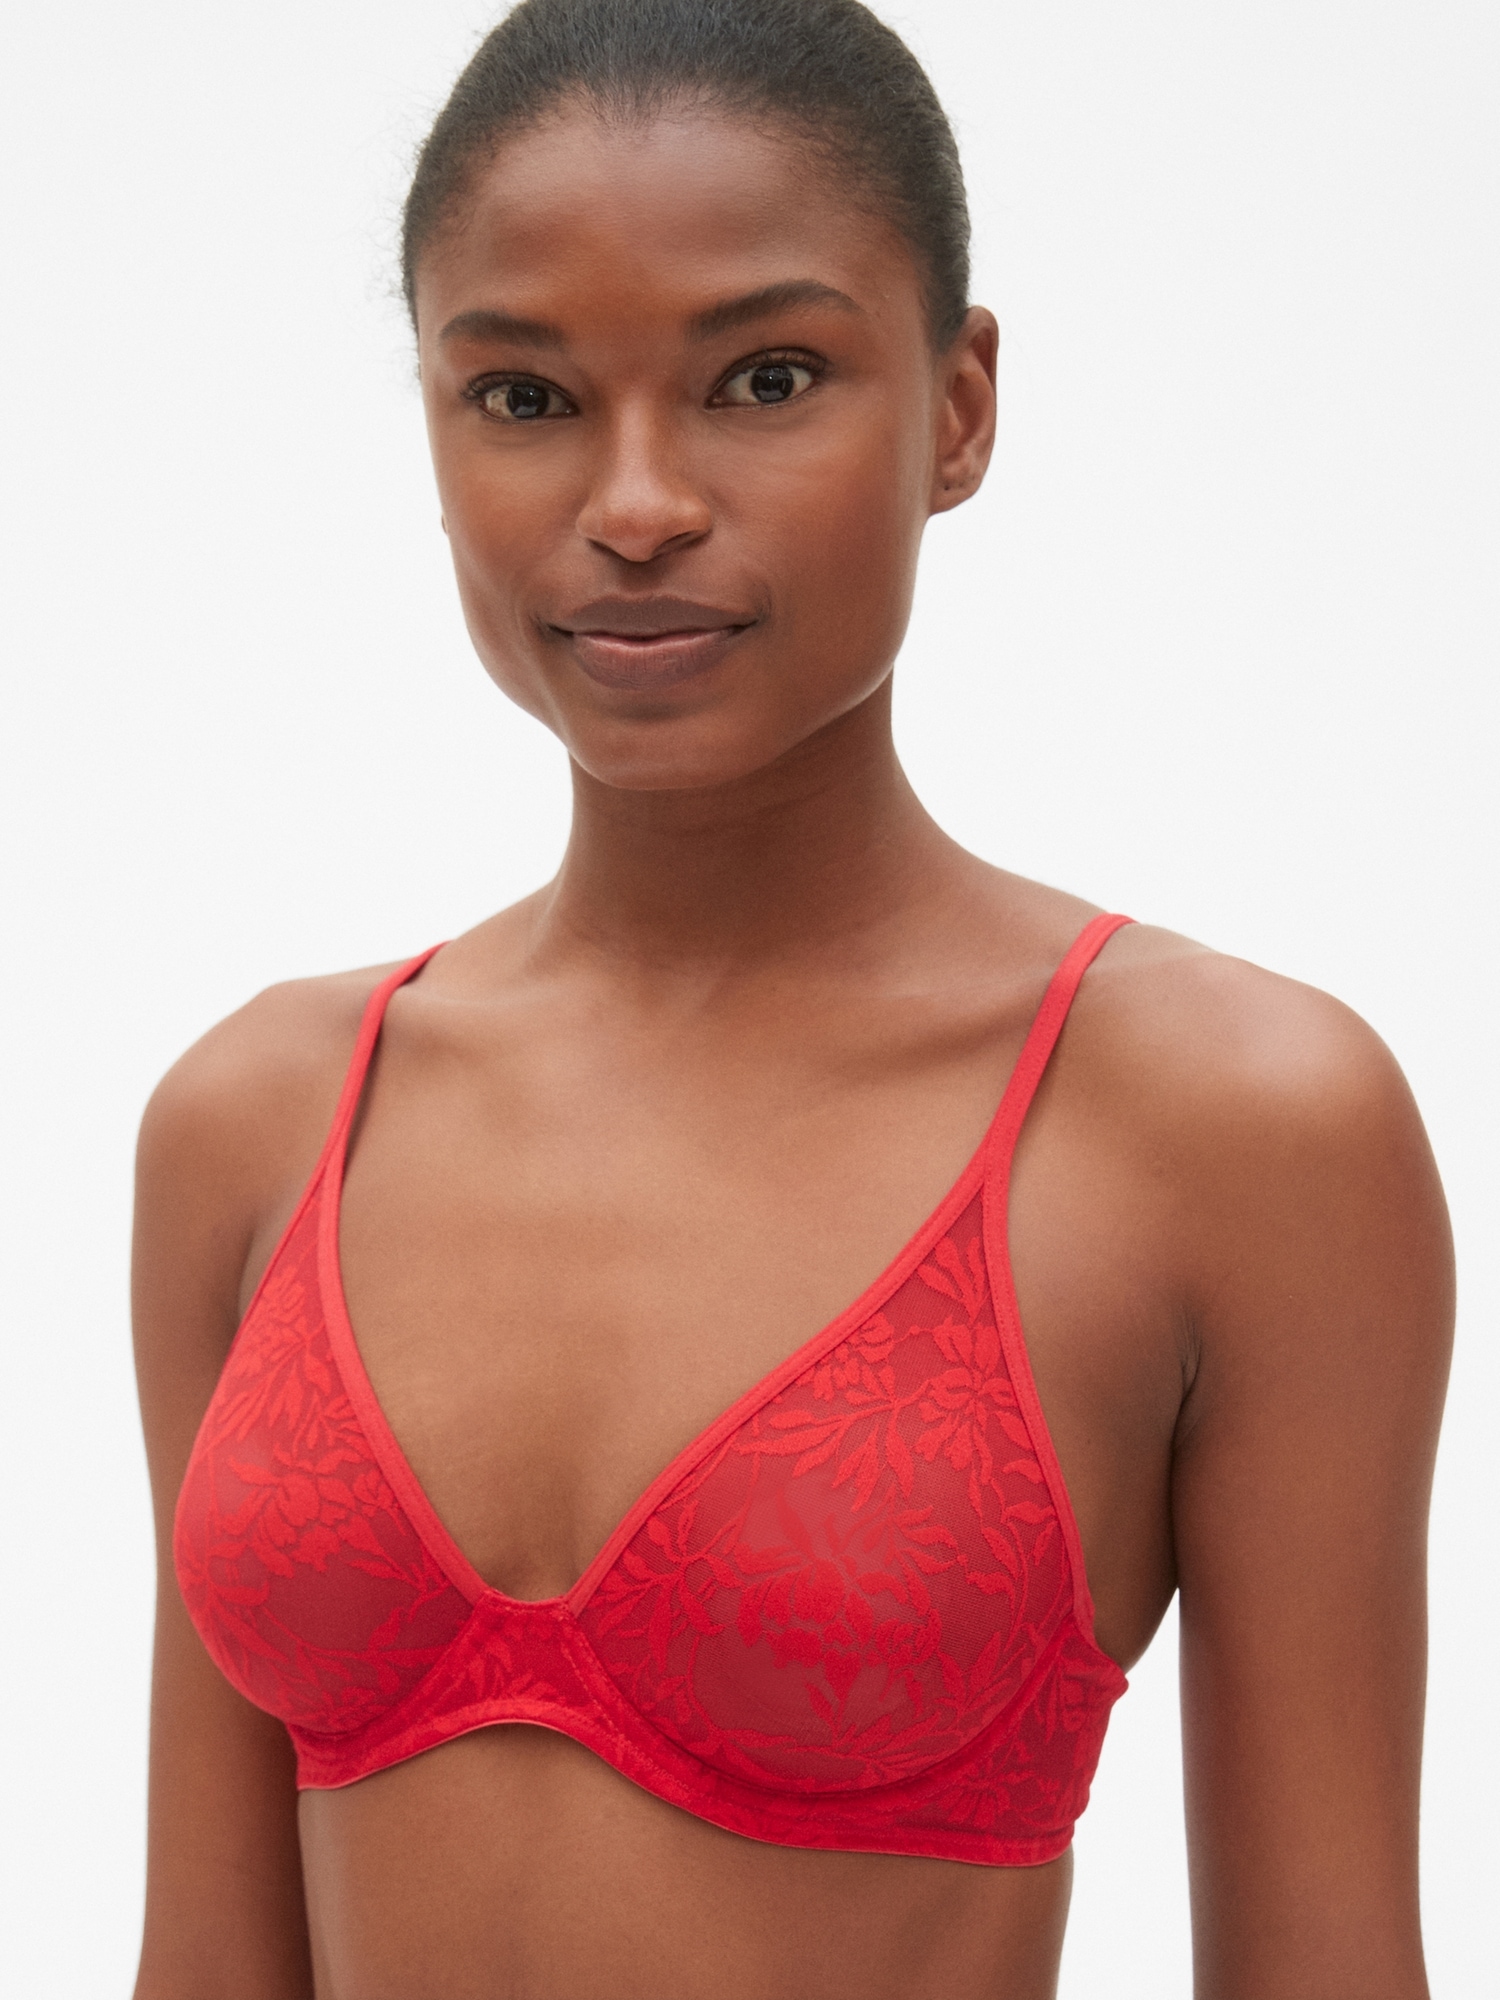 Bare Womens The Wire-Free Front Close Bra with Lace Style-B10241LACE 